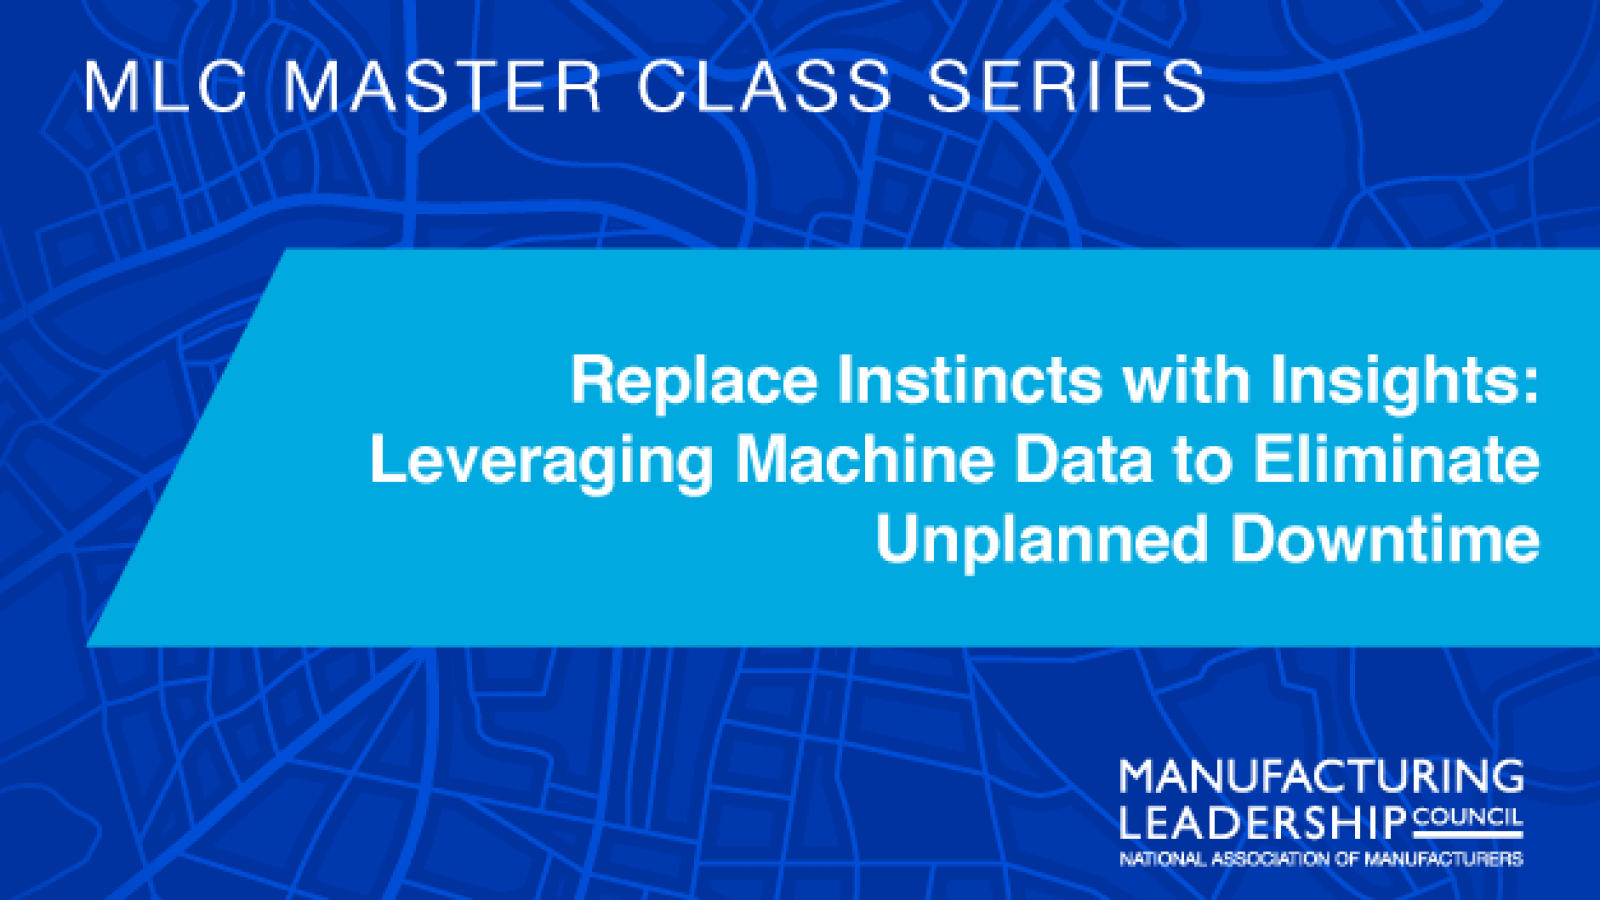 Replace Instincts with Insights: Leveraging Machine Data to Eliminate Unplanned Downtime